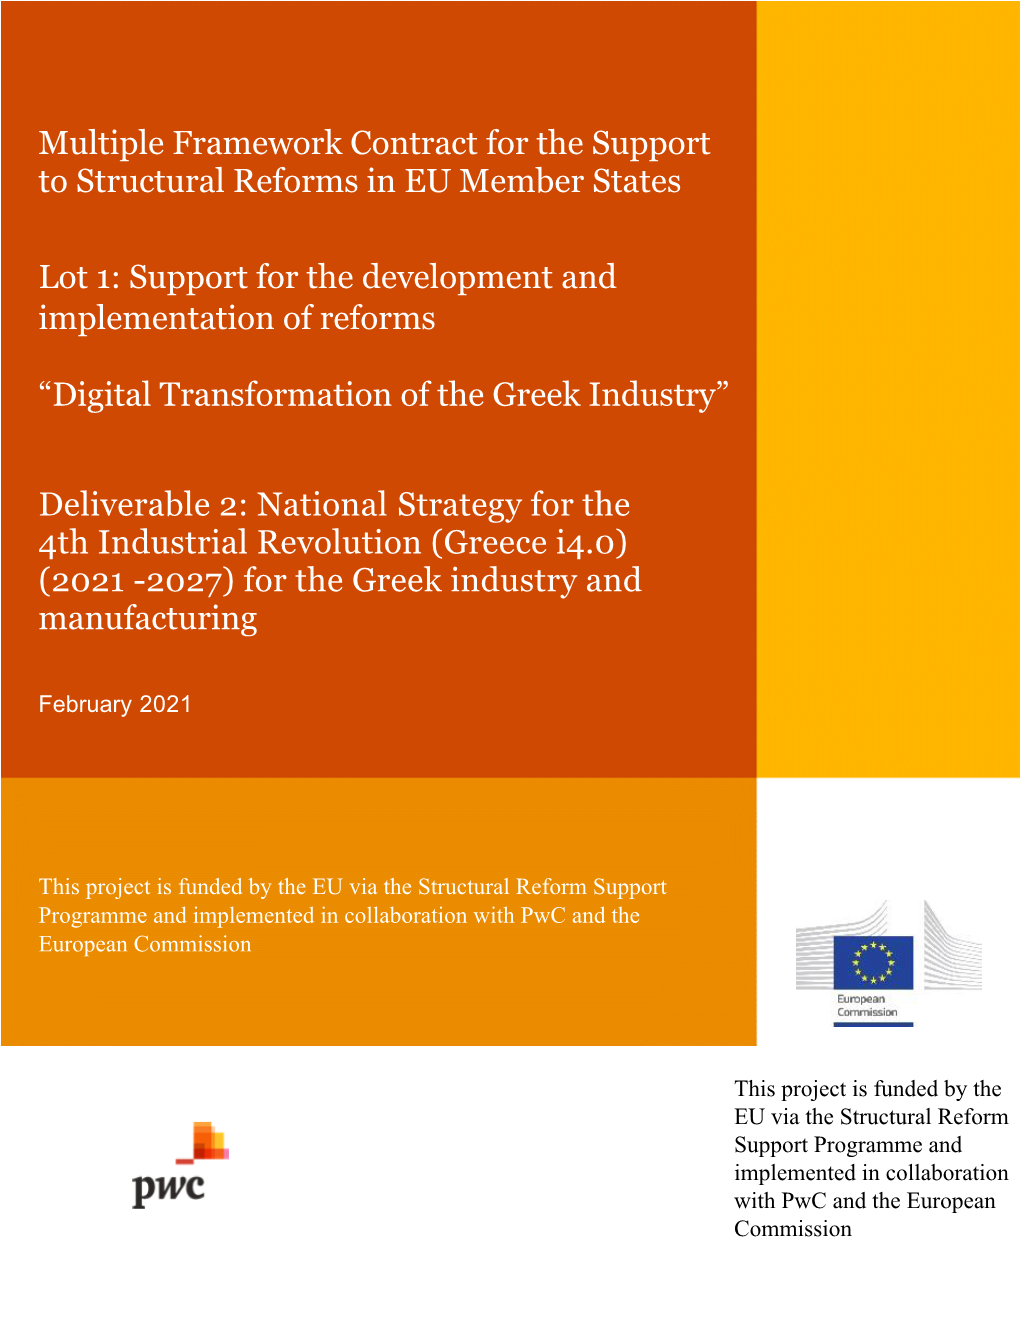 Multiple Framework Contract for the Support to Structural Reforms in EU Member States